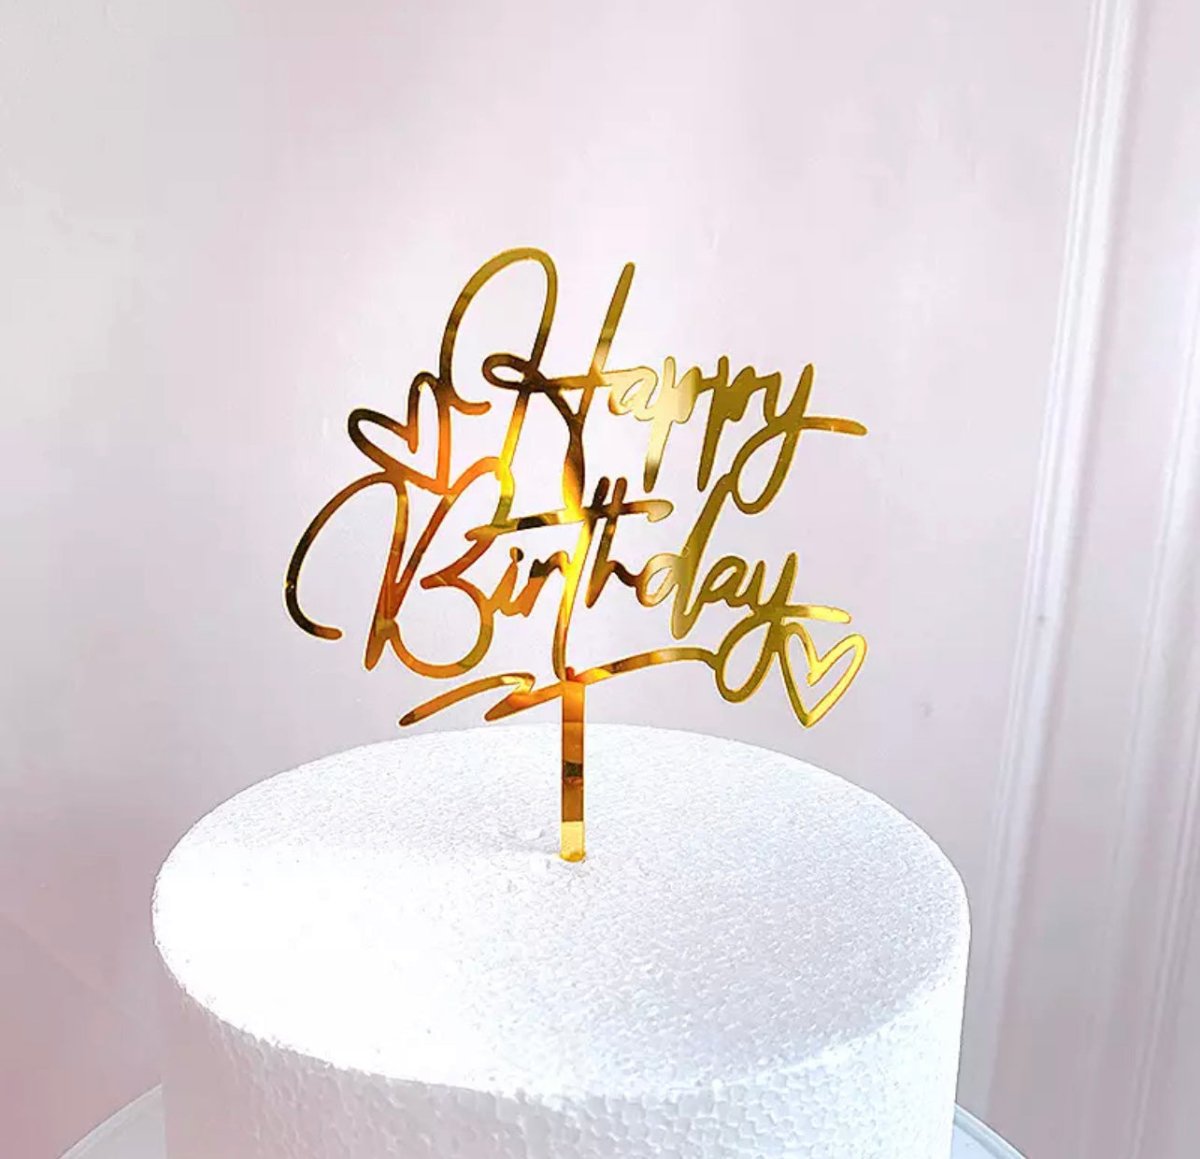 Or Rose Cake Topper,Gâteau Anniversaire Décoration,Happy Birthday Gâteau  Topper,Cupcake Topper,Cake Topper Joyeux,Étoiles Topper avec de Décoration